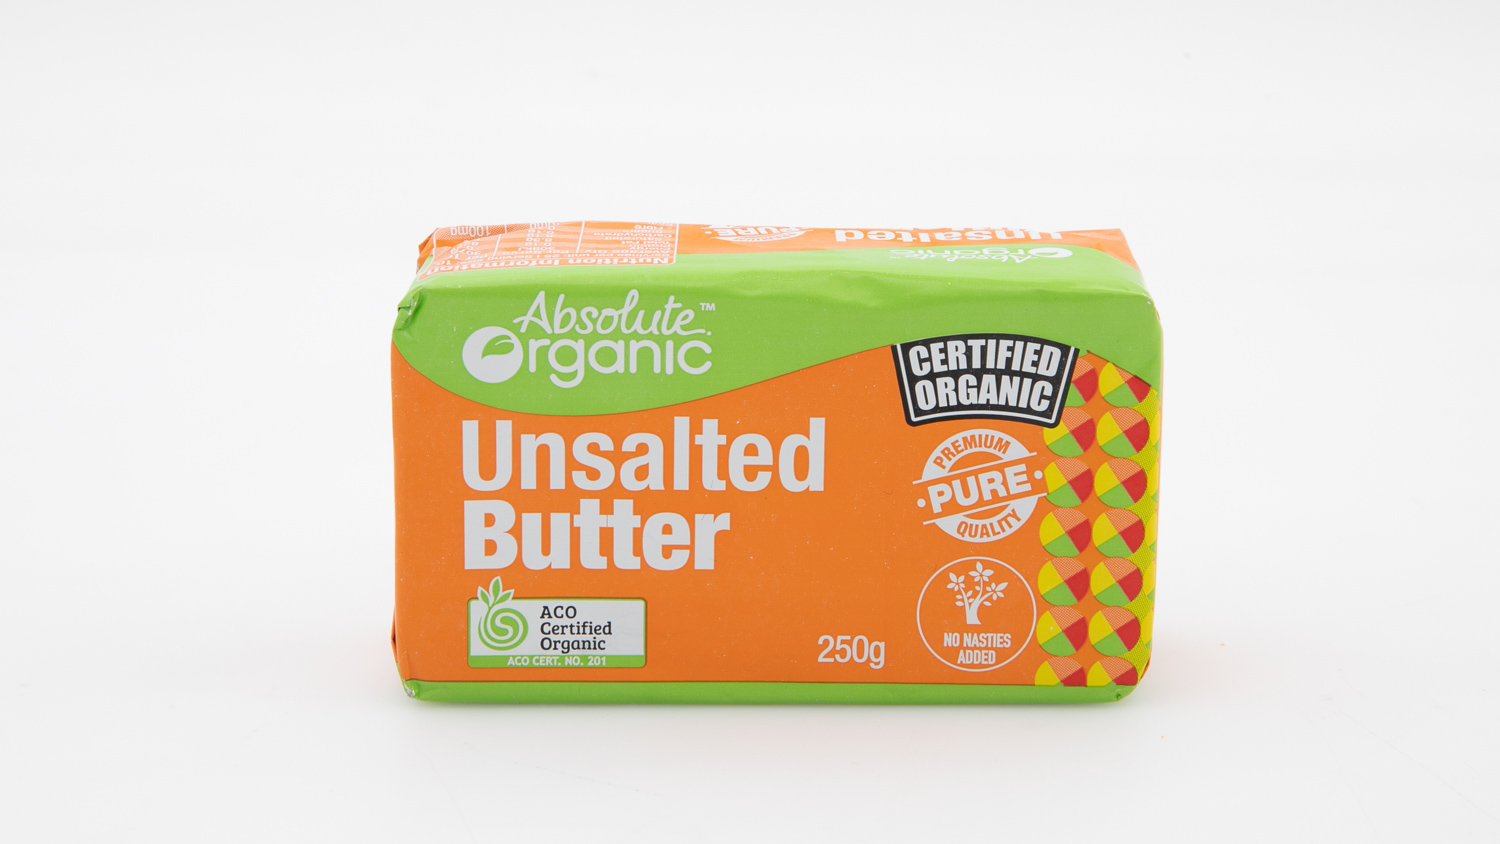 Absolute Organic Unsalted Butter carousel image